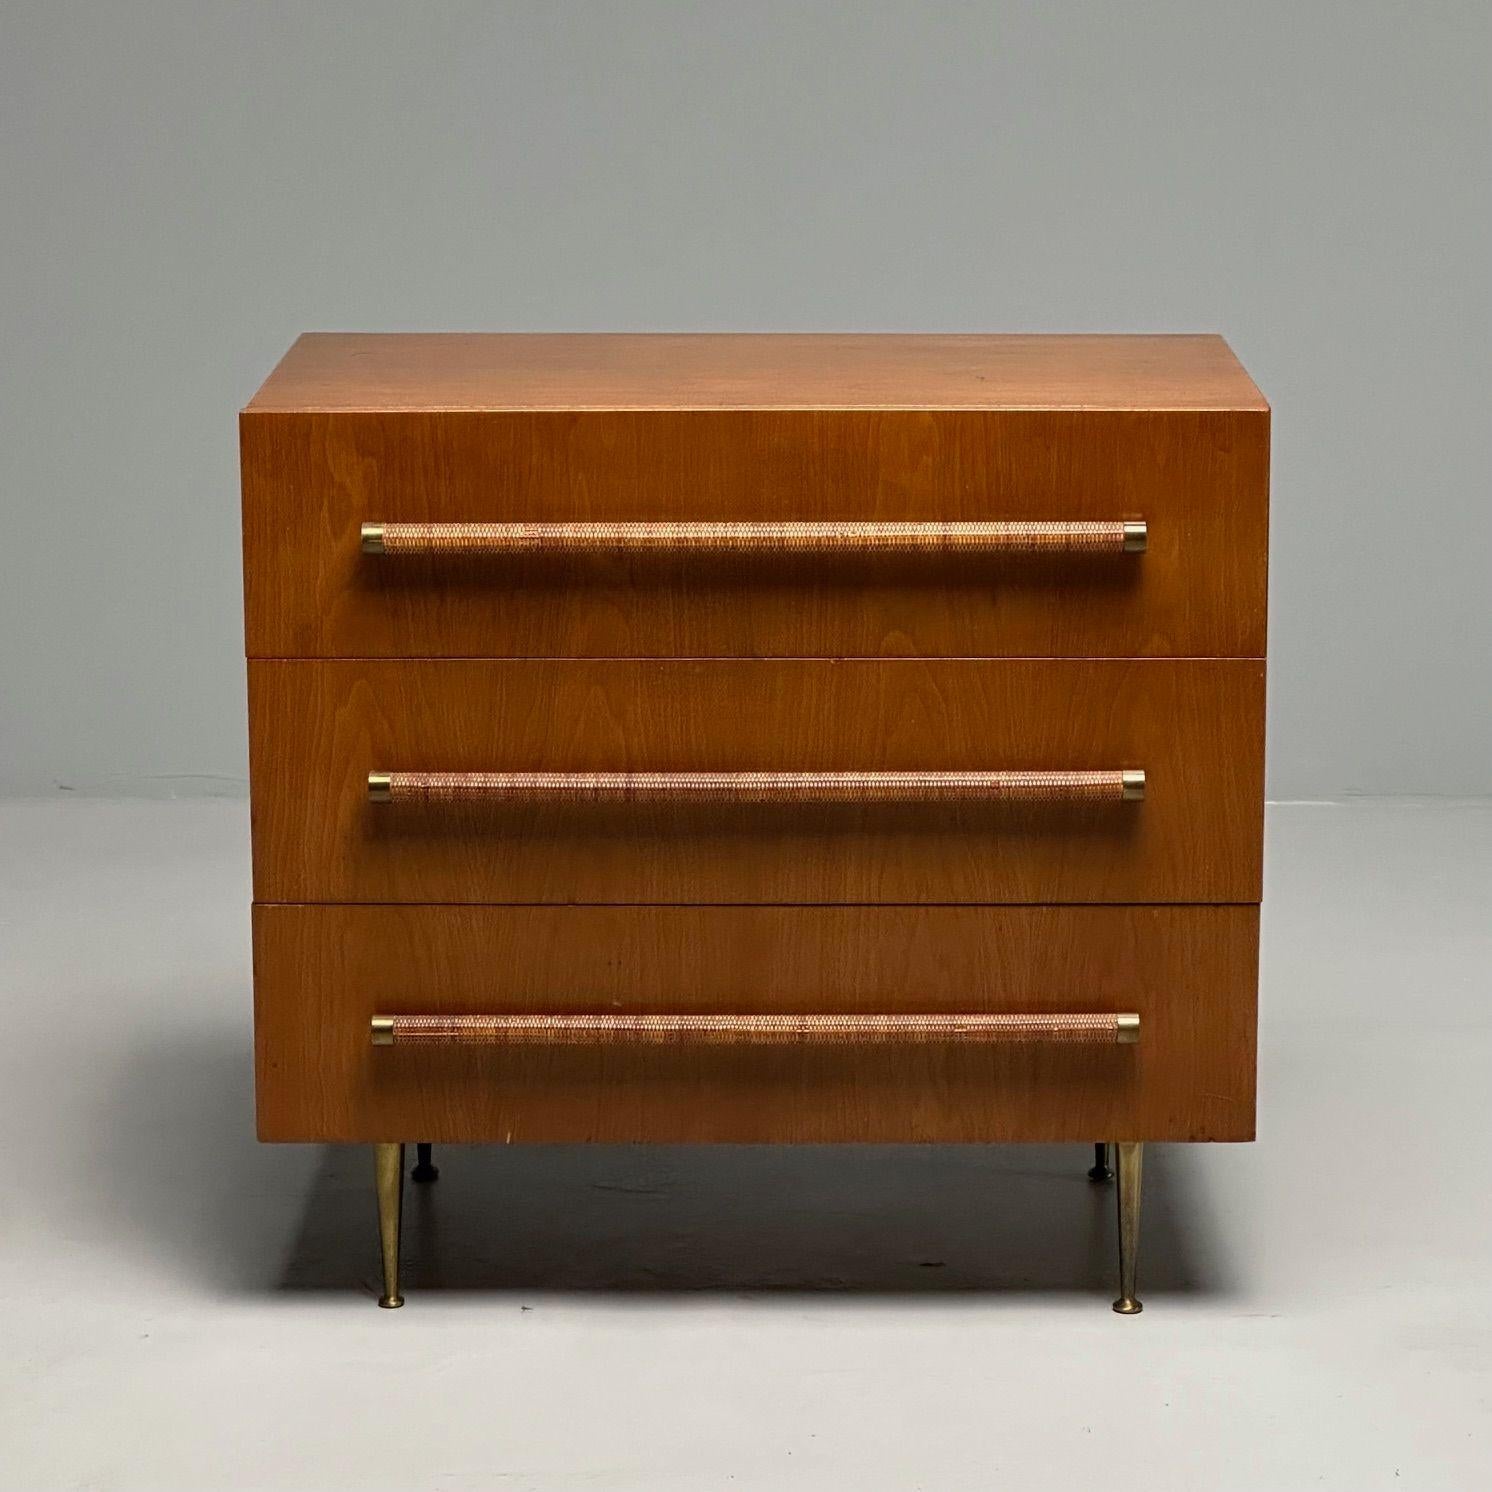 T.H. Robsjohn-Gibbings for John Widdicomb Brass-Mounted Walnut and Cane Chest, Nightstand or Dresser

Highly sought after American mid-century modern walnut three-drawer chest of drawers by T.H. Robsjohn-Gibbings. This example having rattan-wrapped